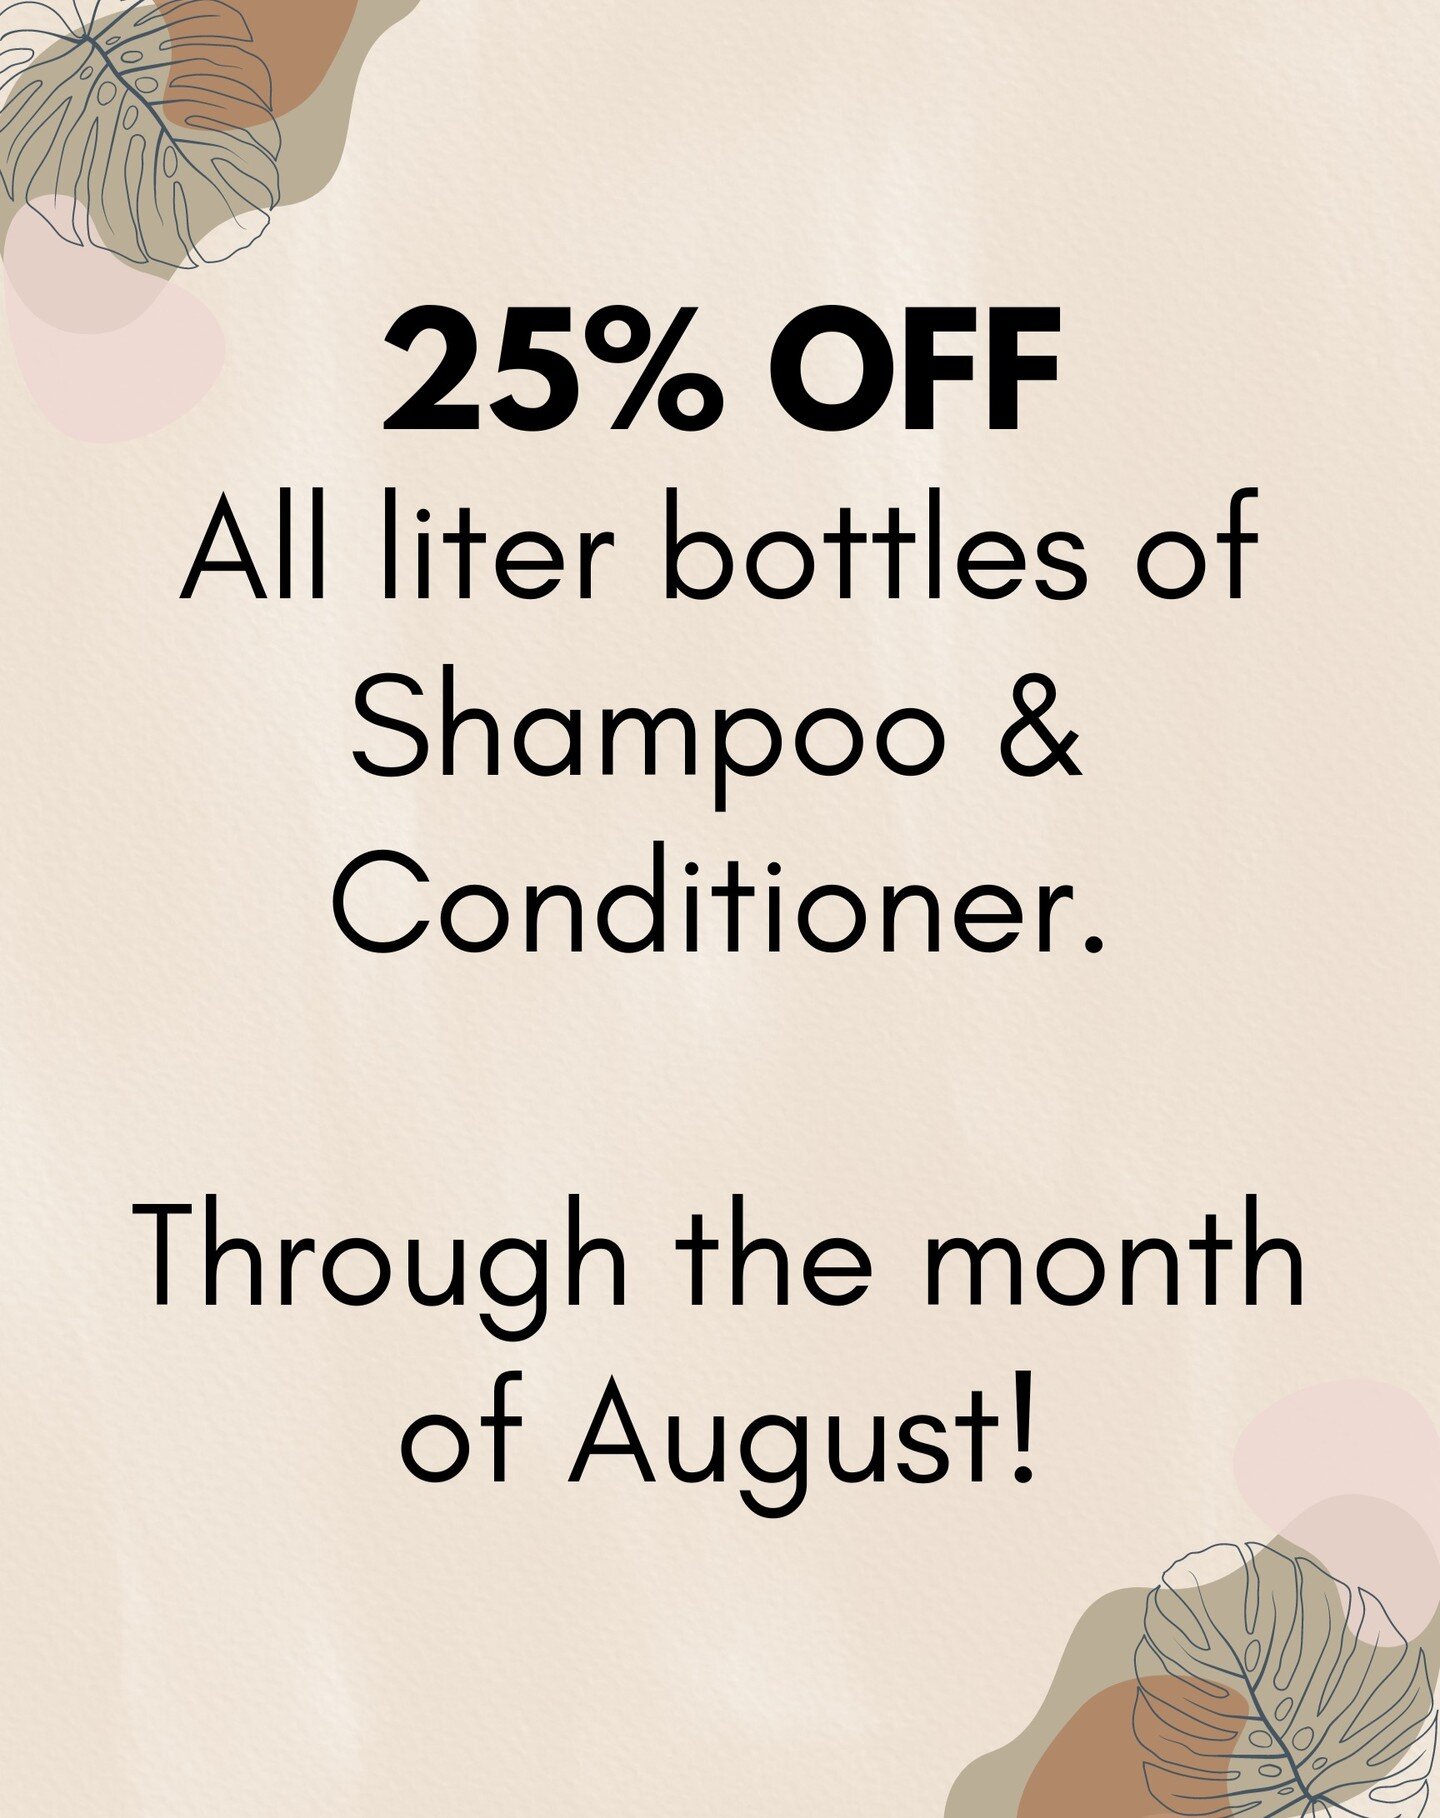 Through the month of August, we are now offering 25% off all liter bottles of shampoo and conditioner!